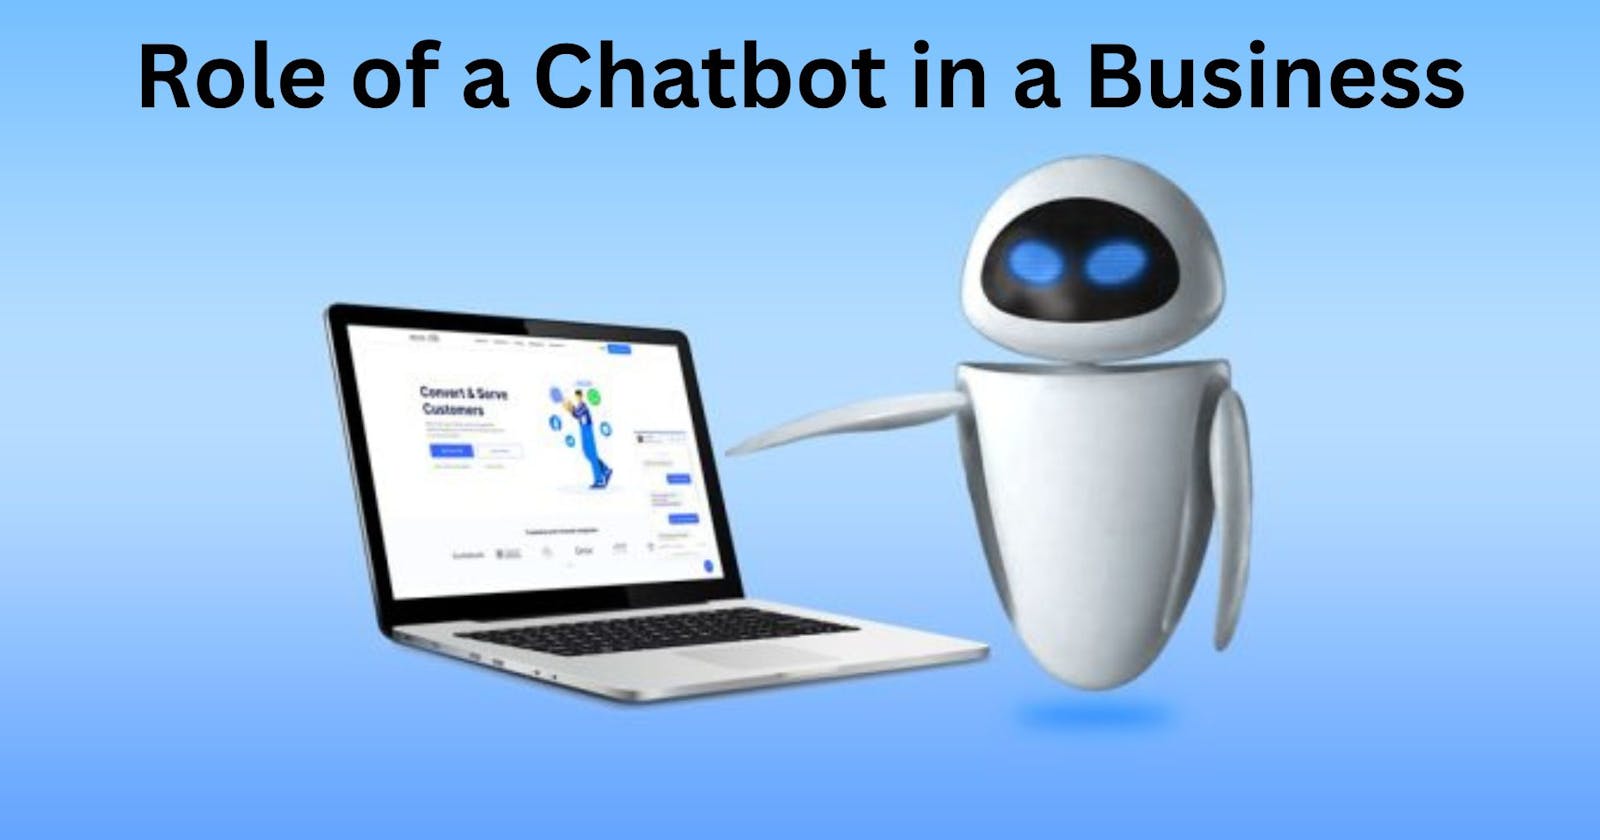 What role can a Chatbot play in your business?